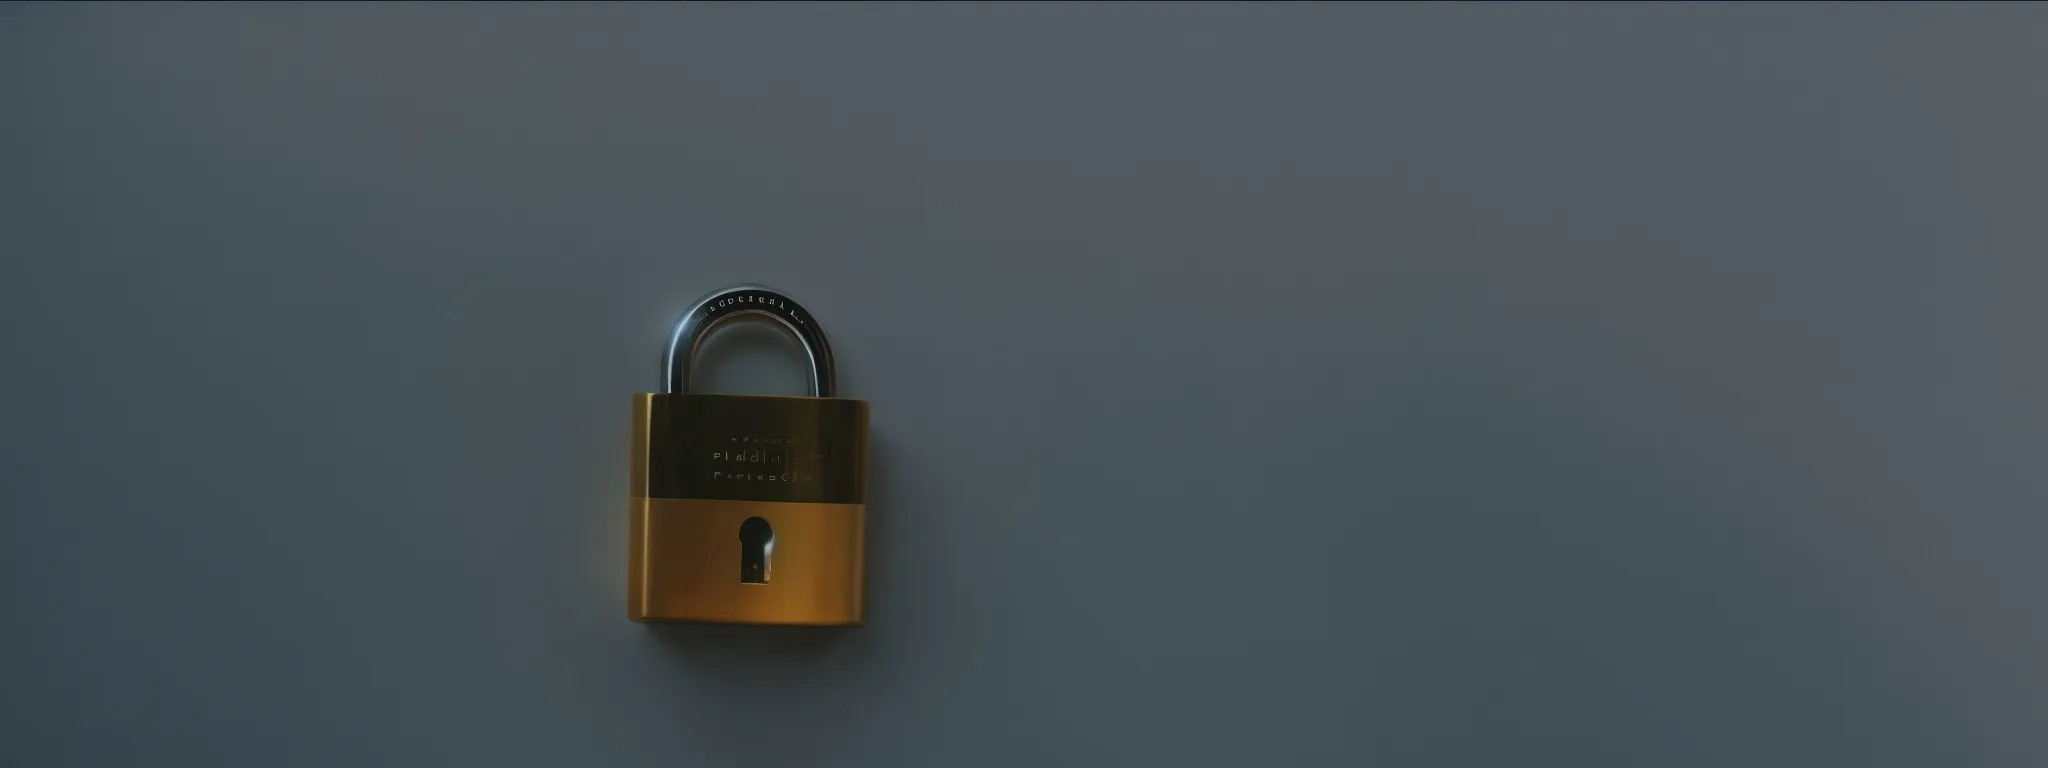 a locked padlock symbol appears on the address bar of a website, signaling secure encryption.